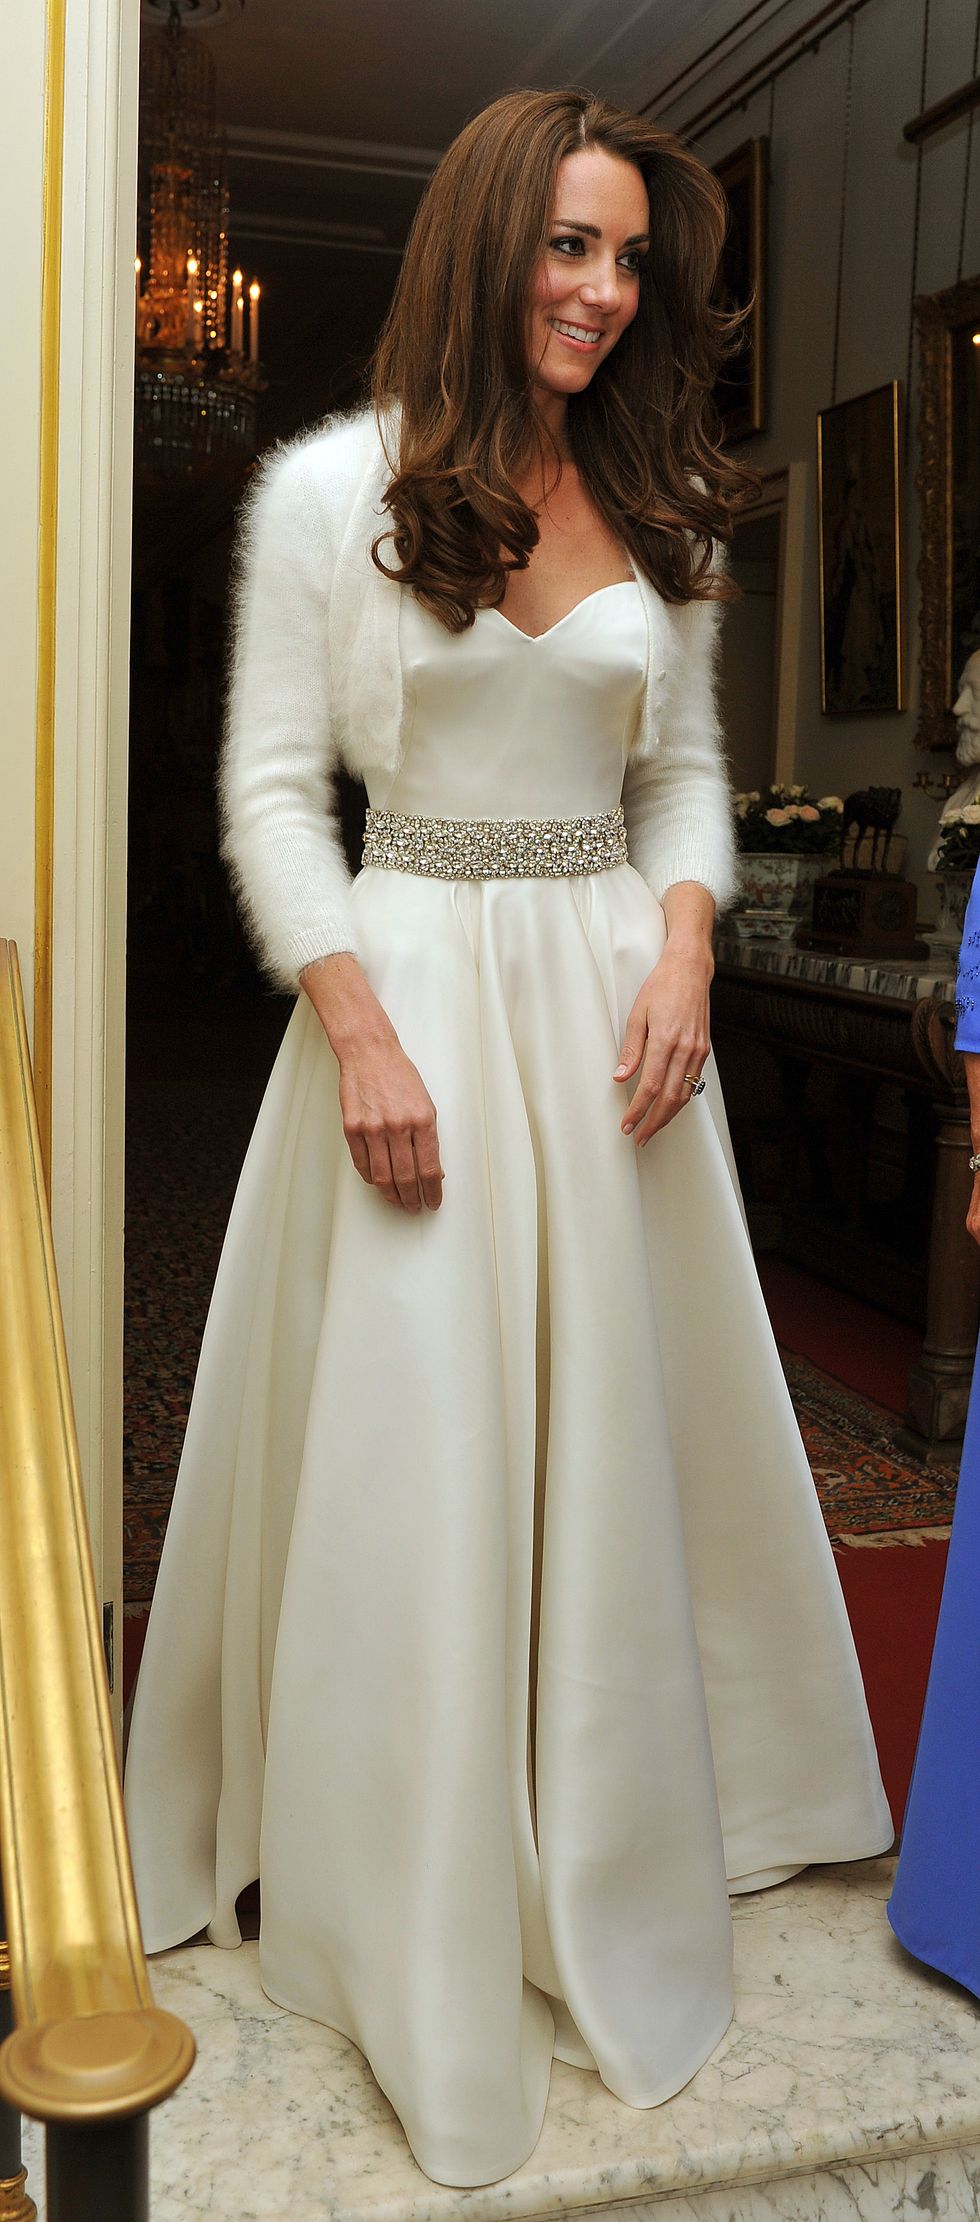 Just Some Gorgeous Pics of Middleton's Second Wedding Dress